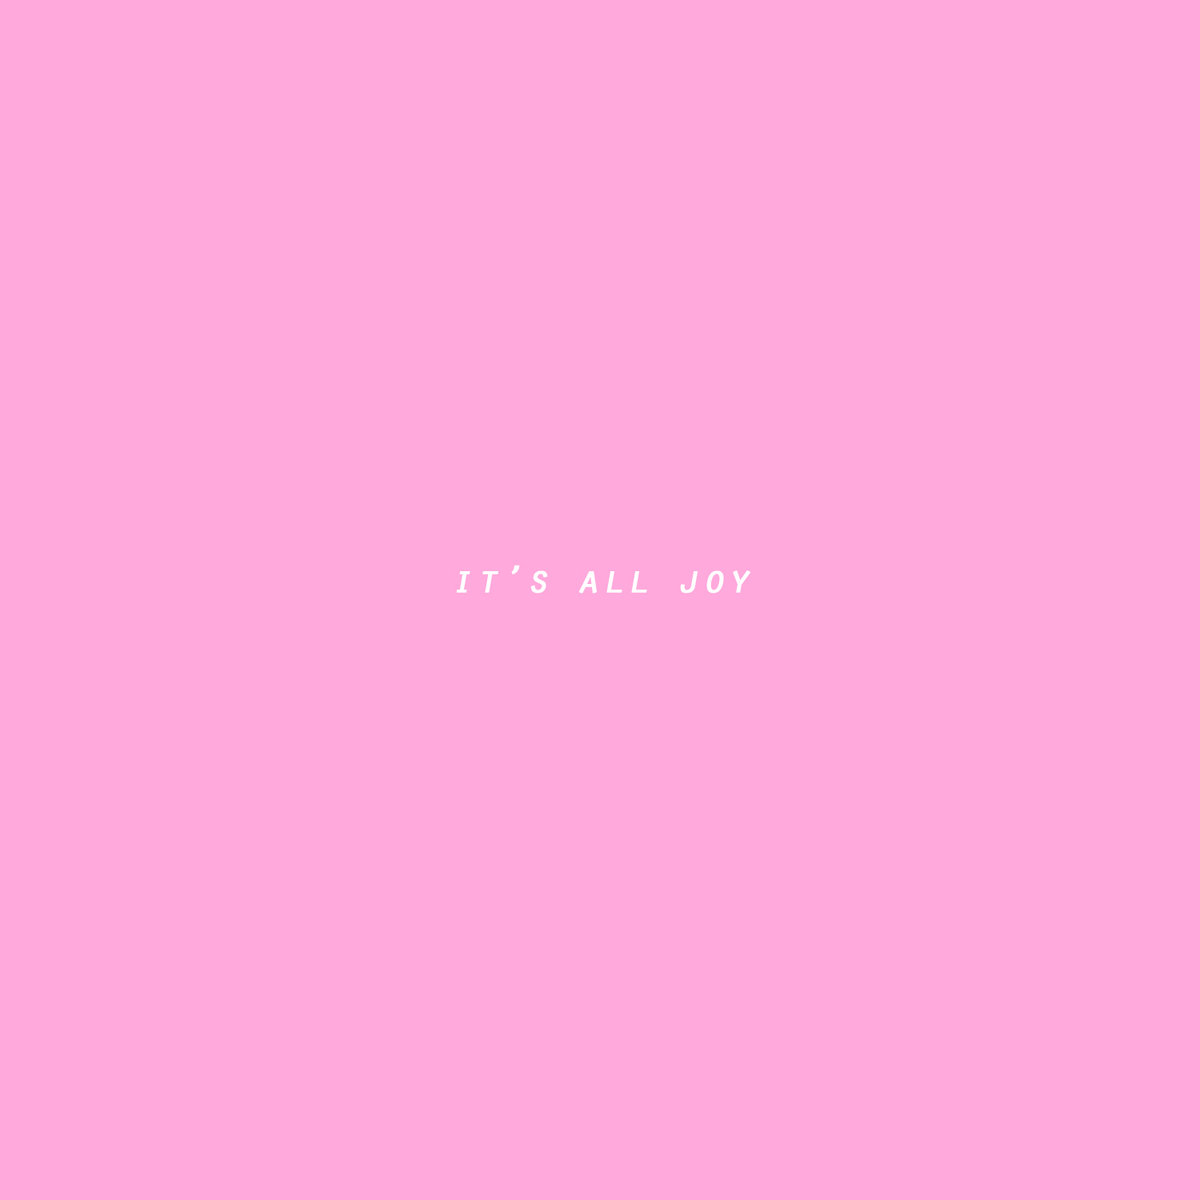 Review: It’s All Joy by Chris Bernstorf